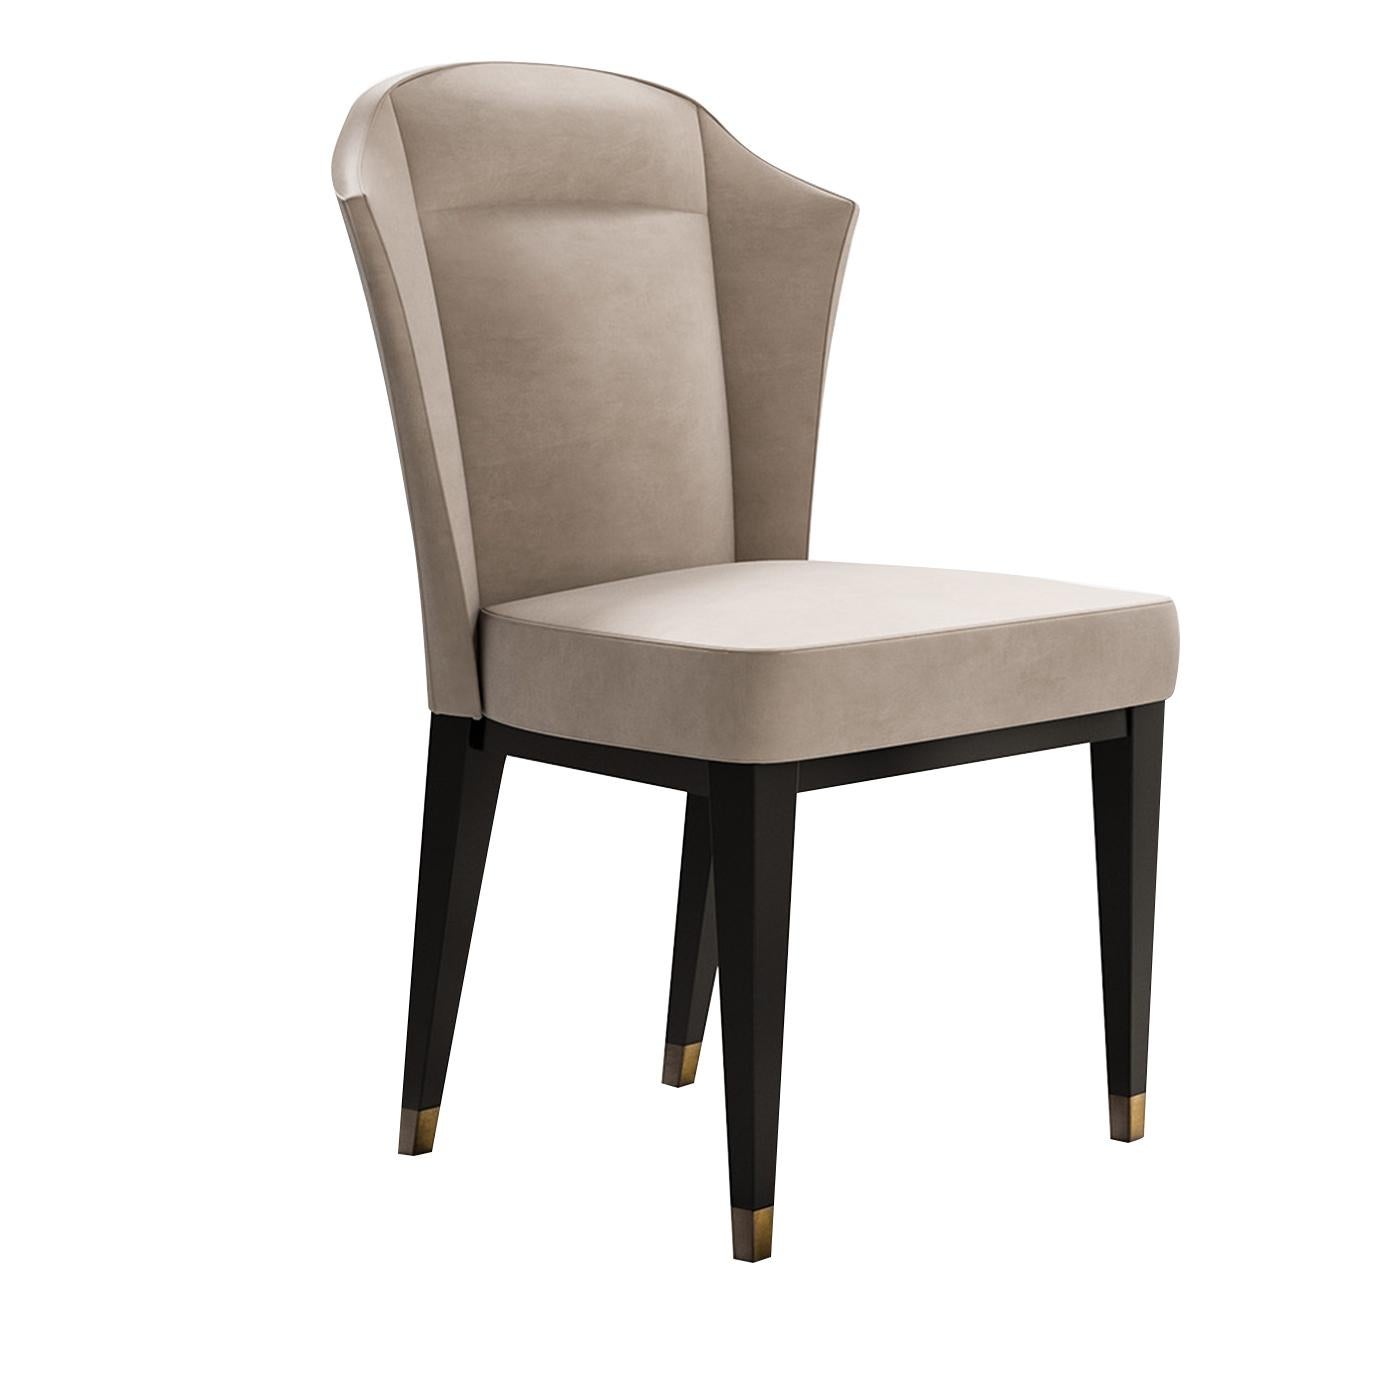 Italian Eclipse Dining Chair For Sale